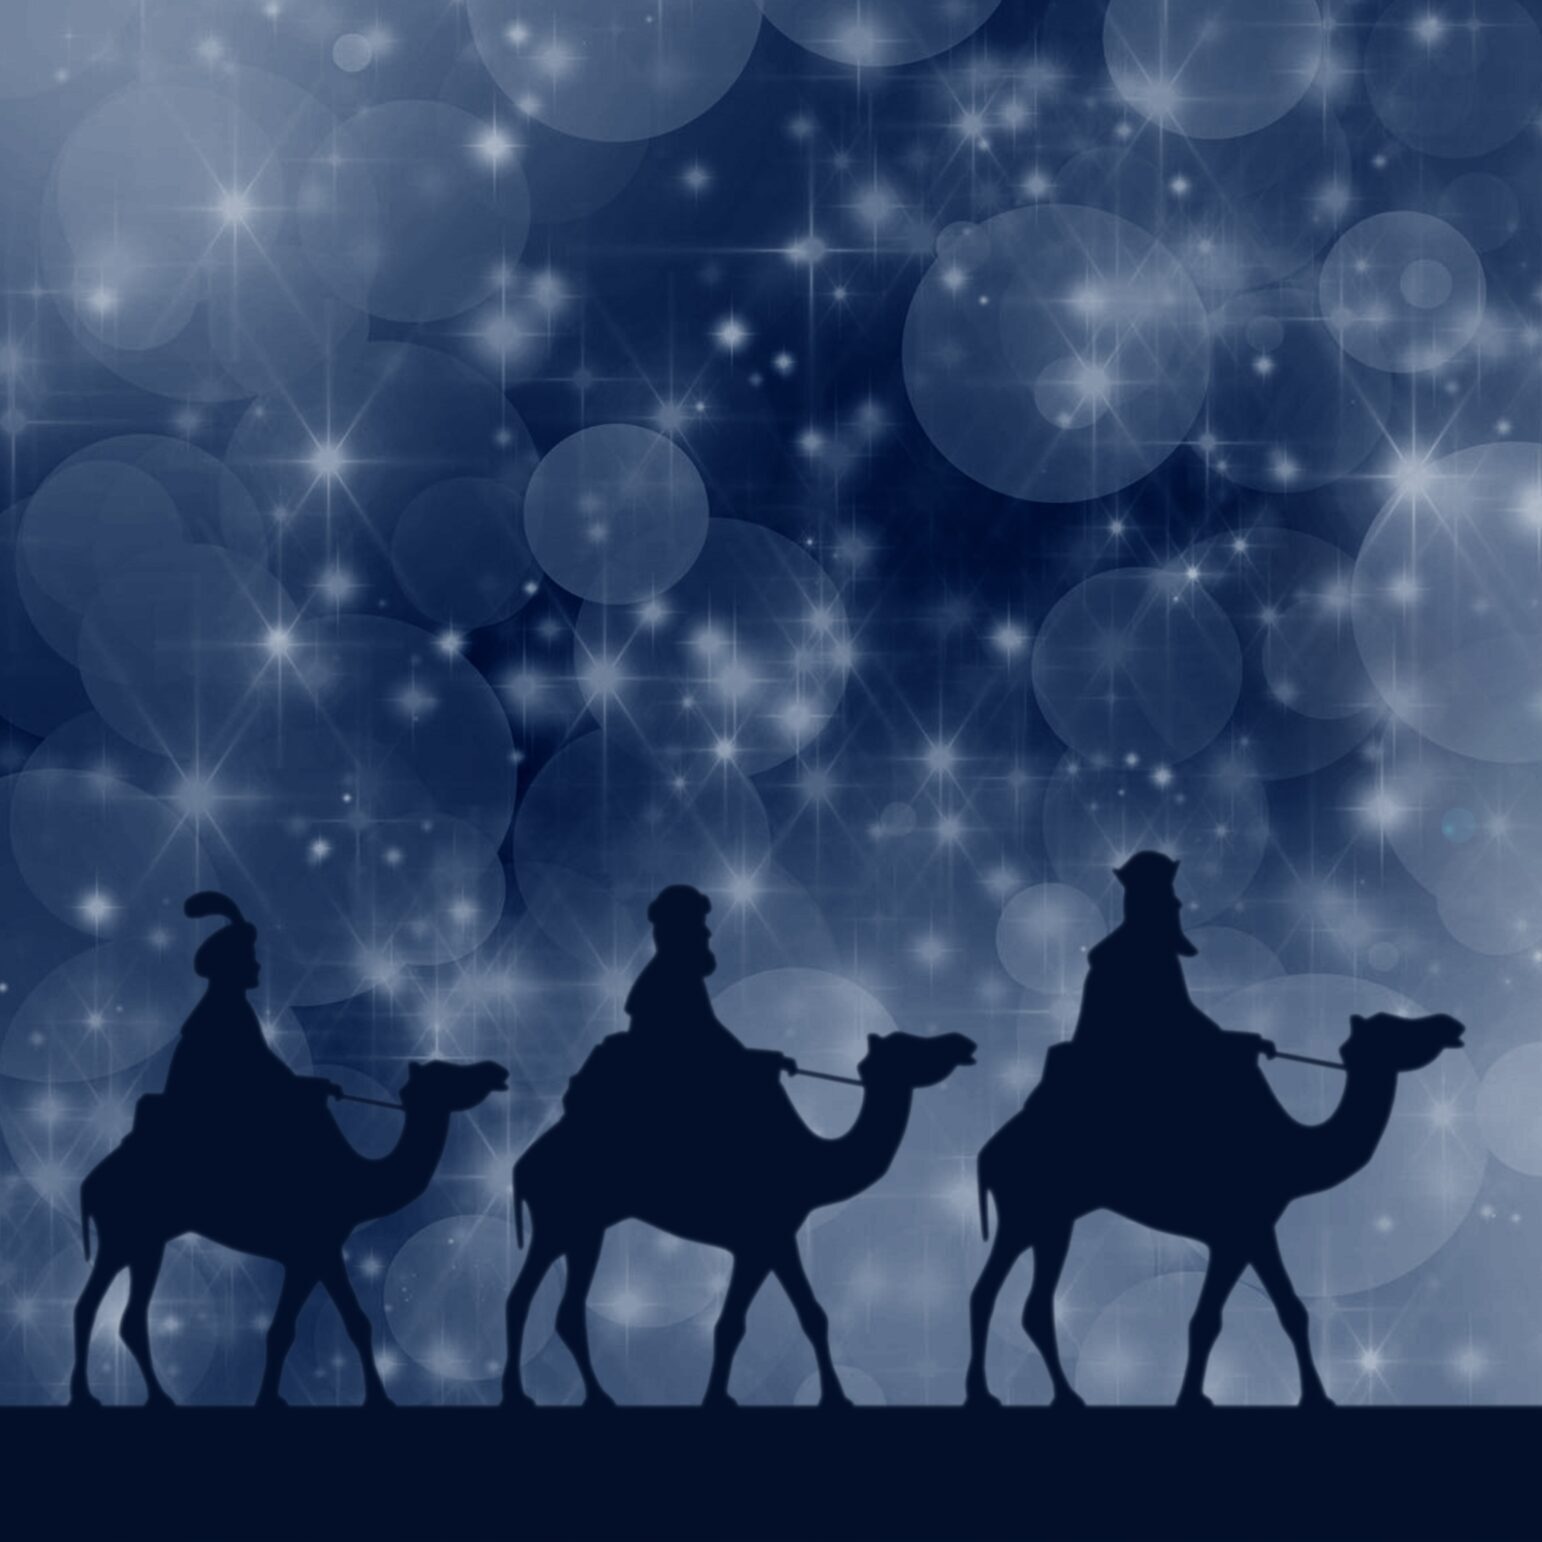 Wise Men in the Christmas Story